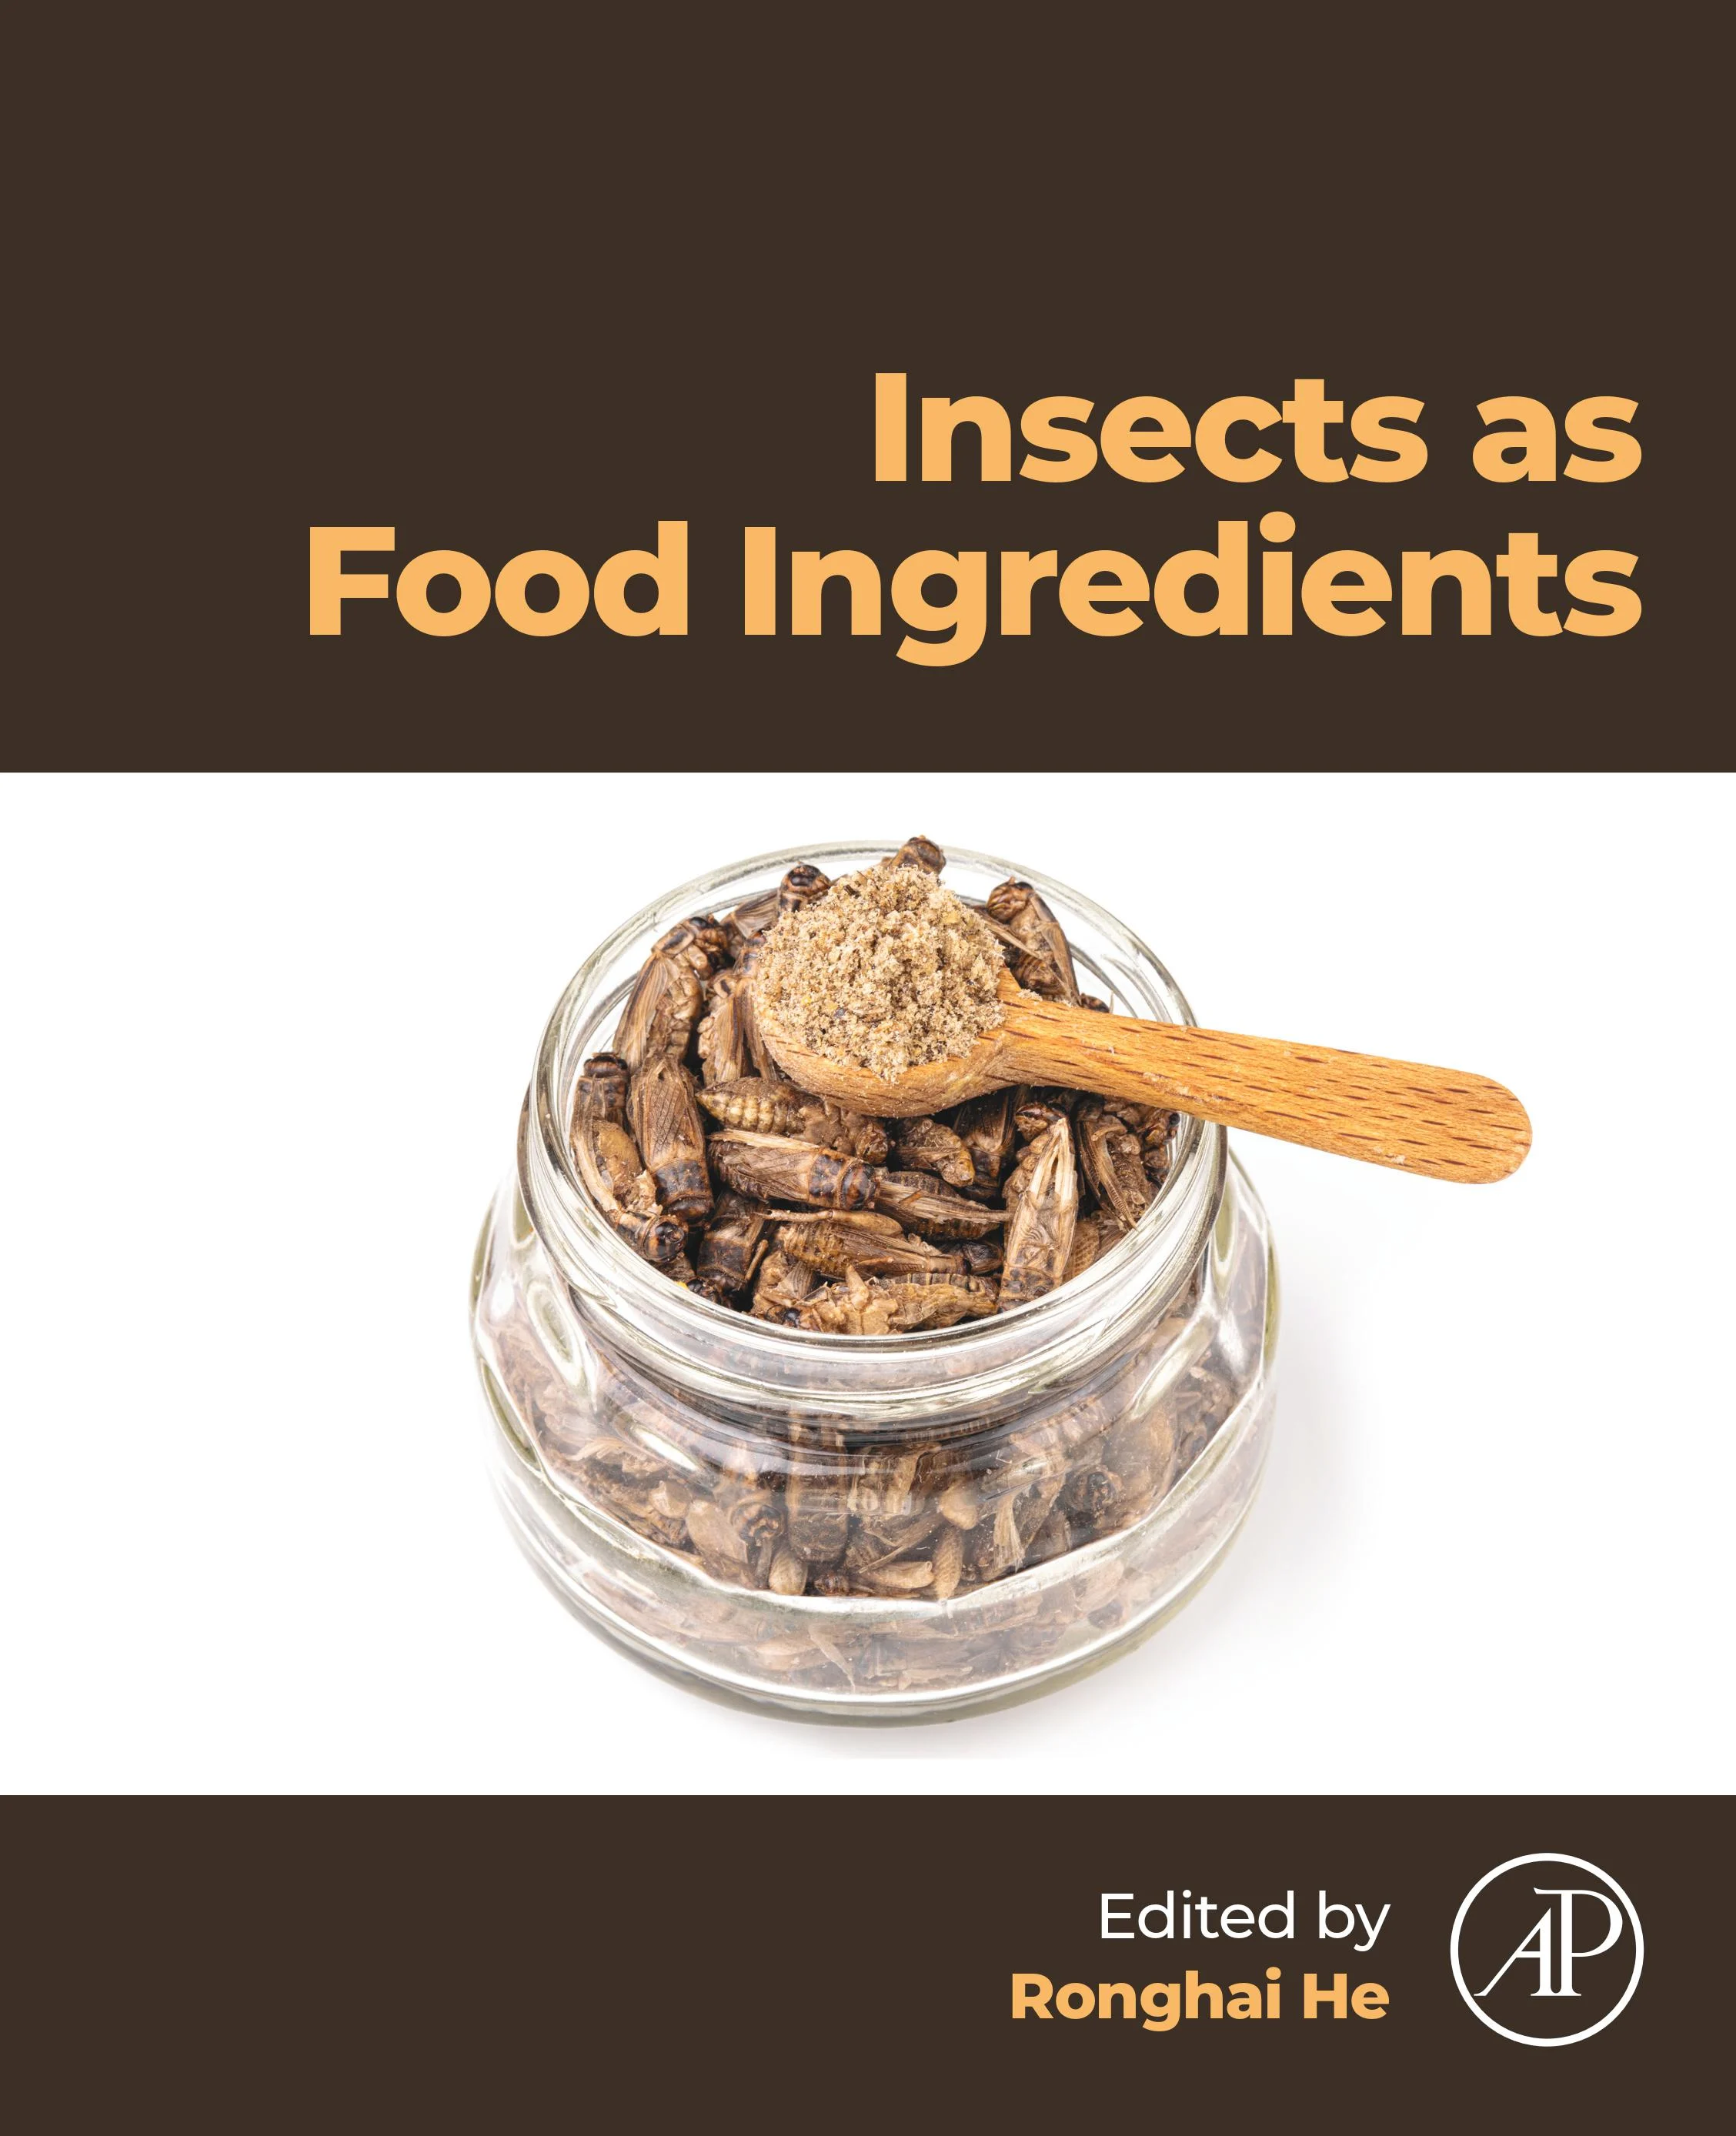 Sample cover of Insects as Food Ingredients 